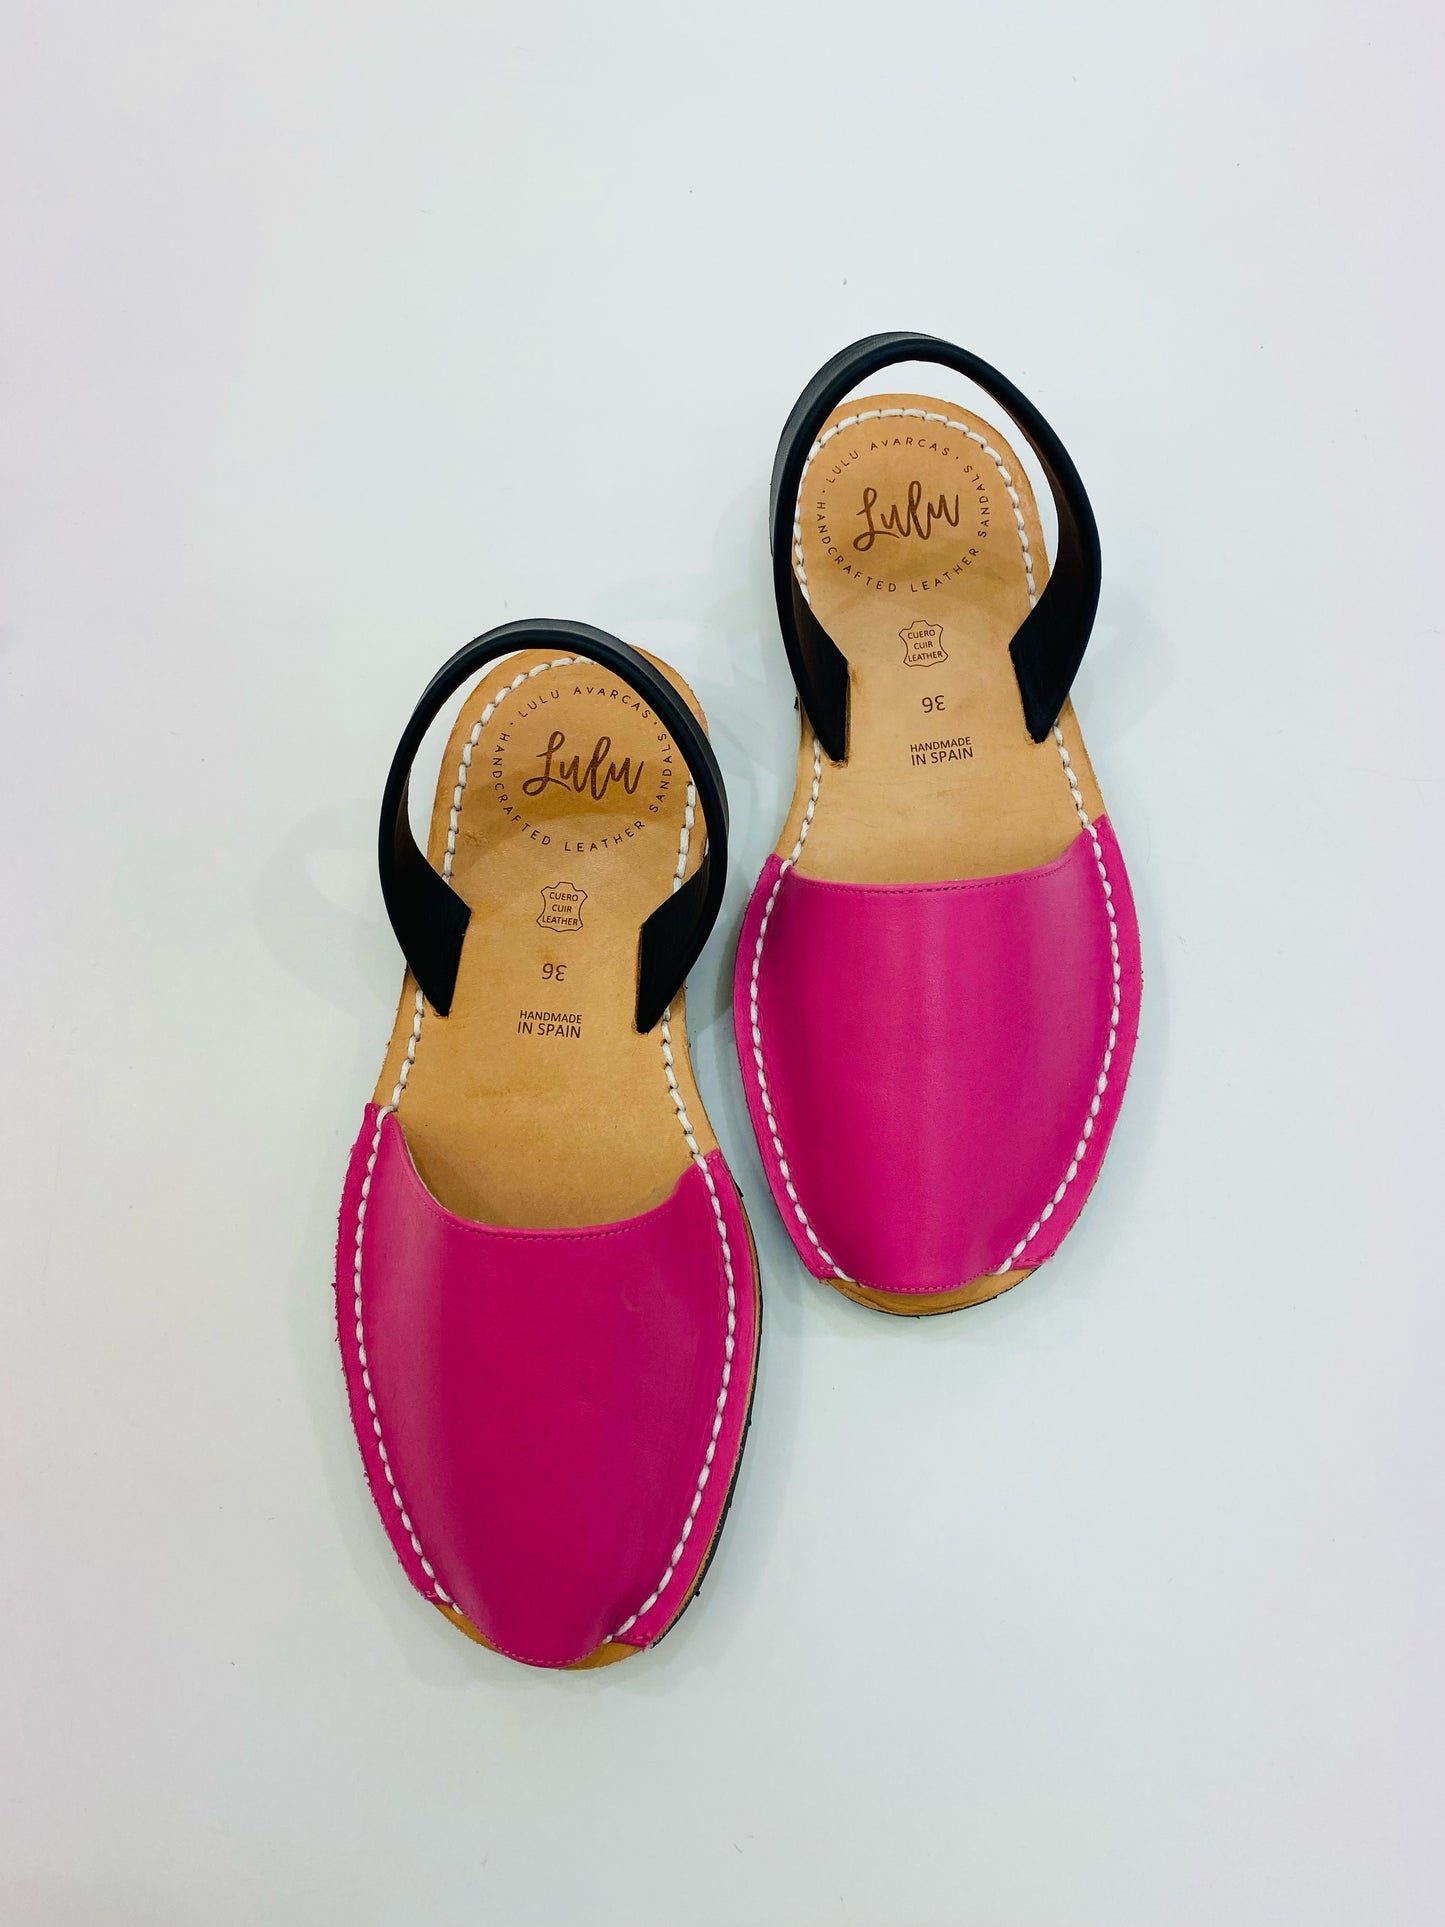 LULU AVARCAS LEATHER FLAT SANDAL IN PINK WITH BLACK STRAP